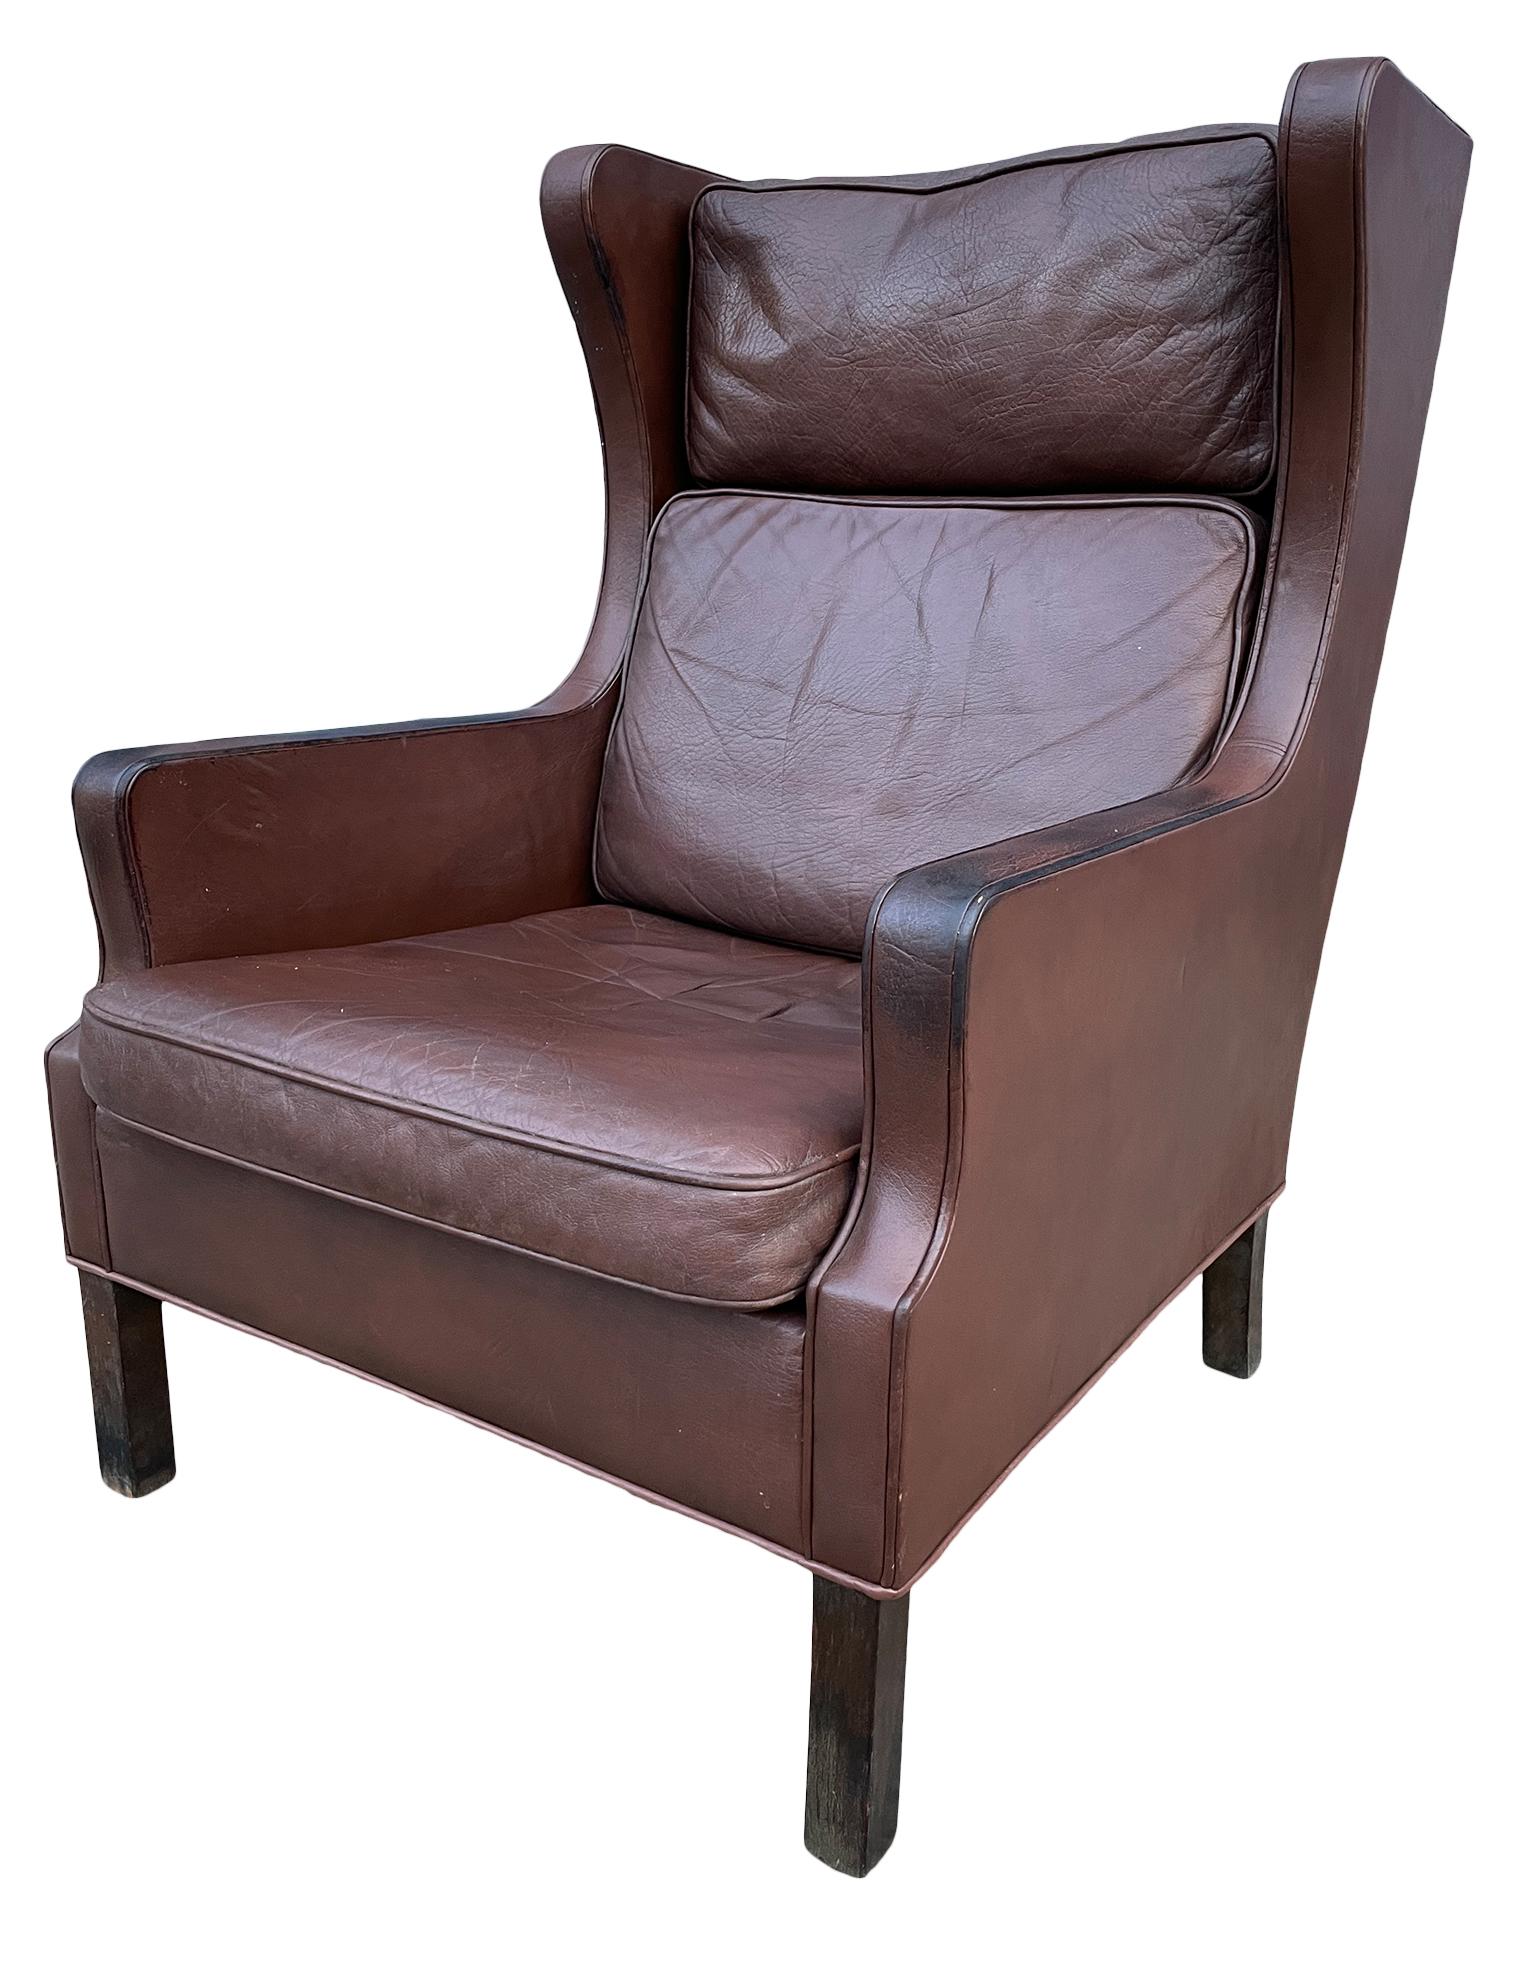 Woodwork Midcentury Danish Modern Wingback Leather Chair by Børge Mogensen For Sale